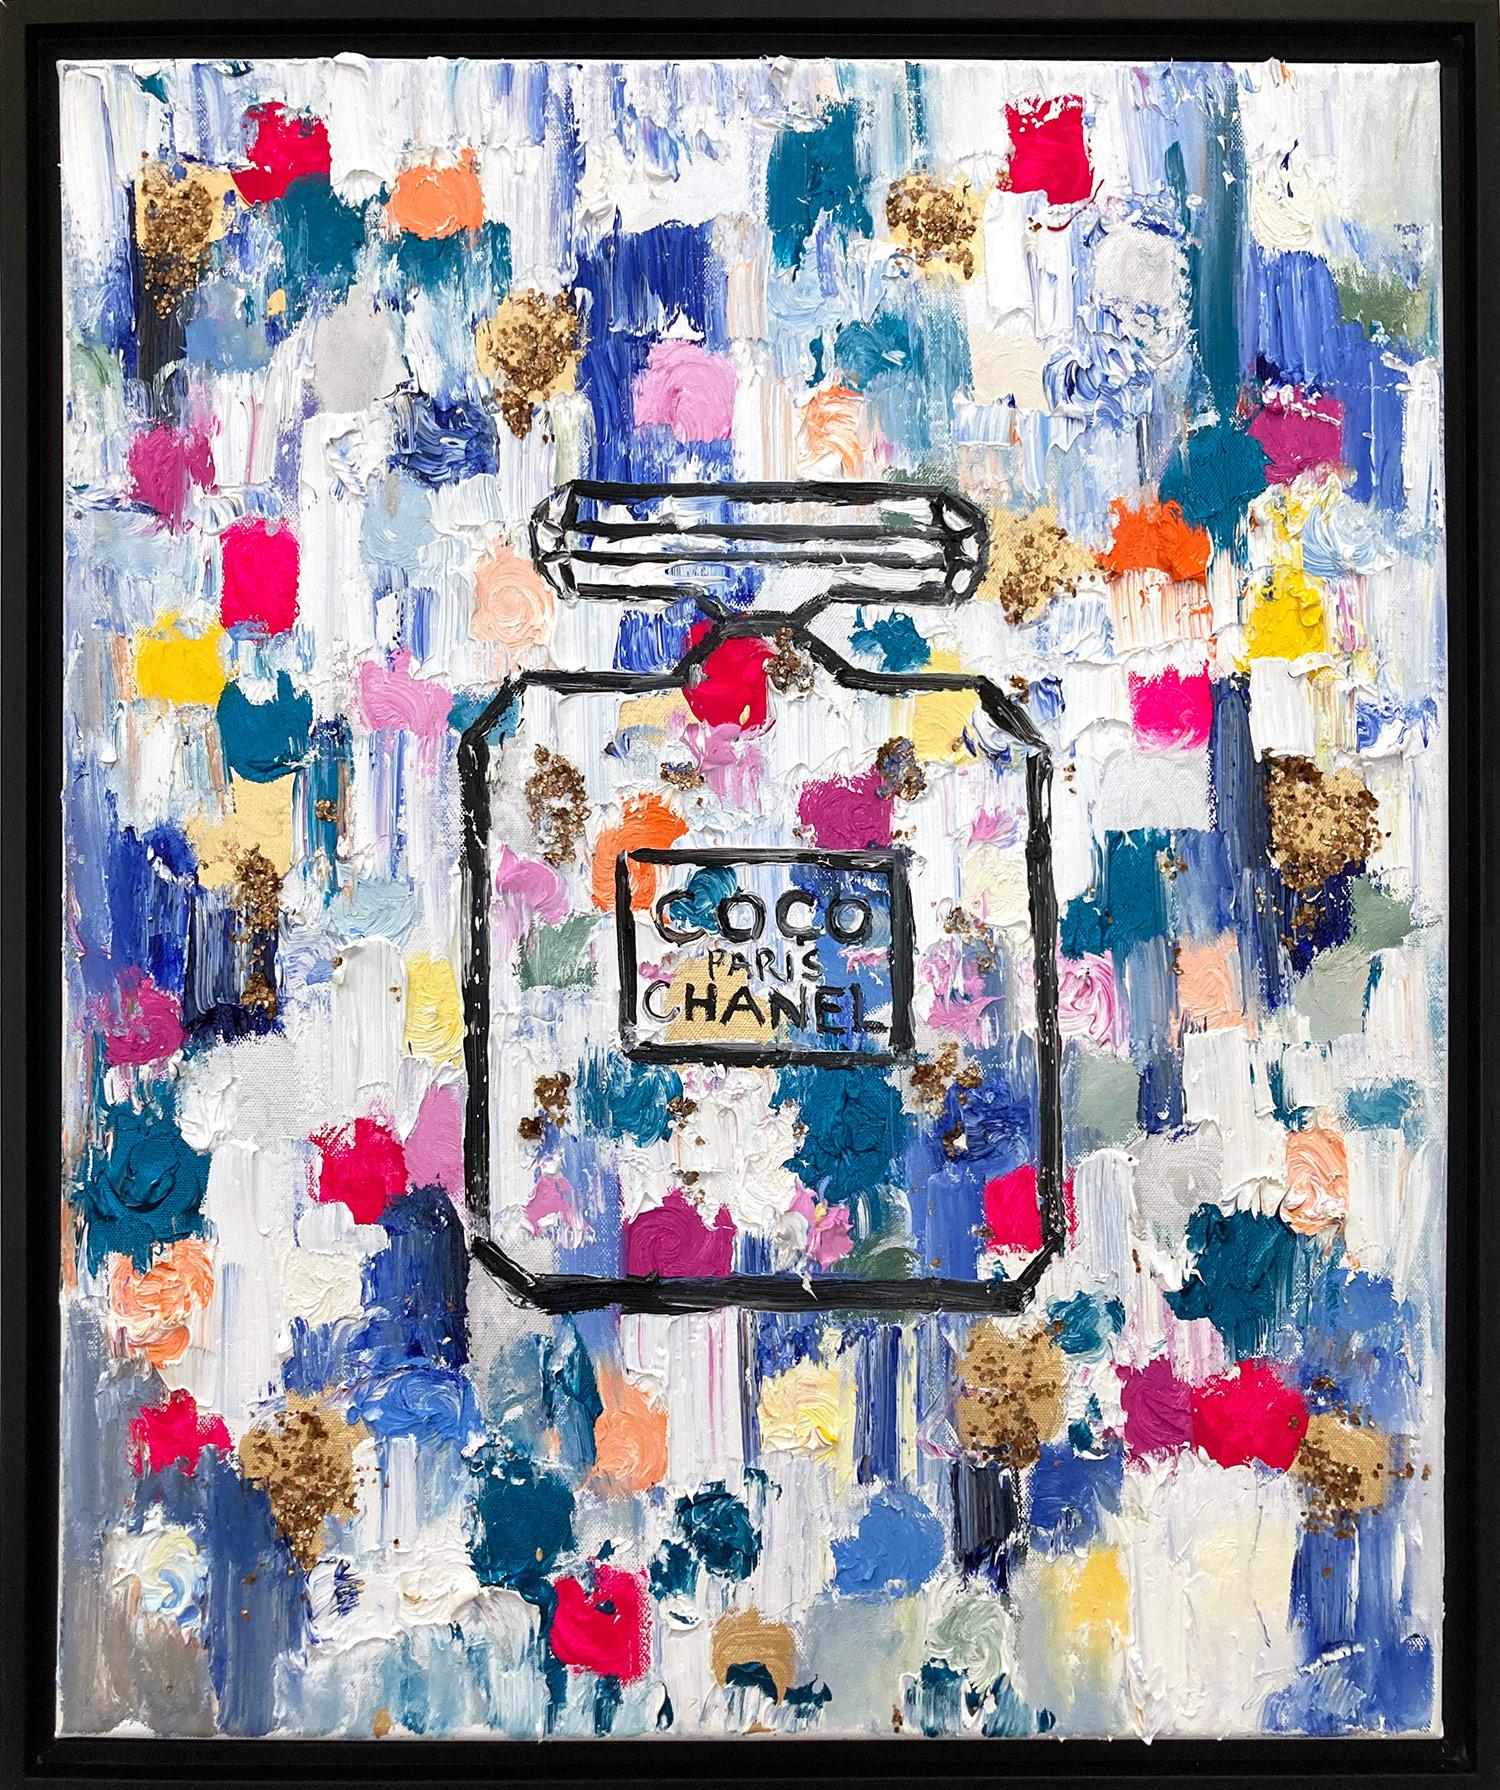 Cindy Shaoul Abstract Painting - "Dripping Dots - Coco in Ibiza" Pop Art Chanel Perfume Bottle Oil Painting